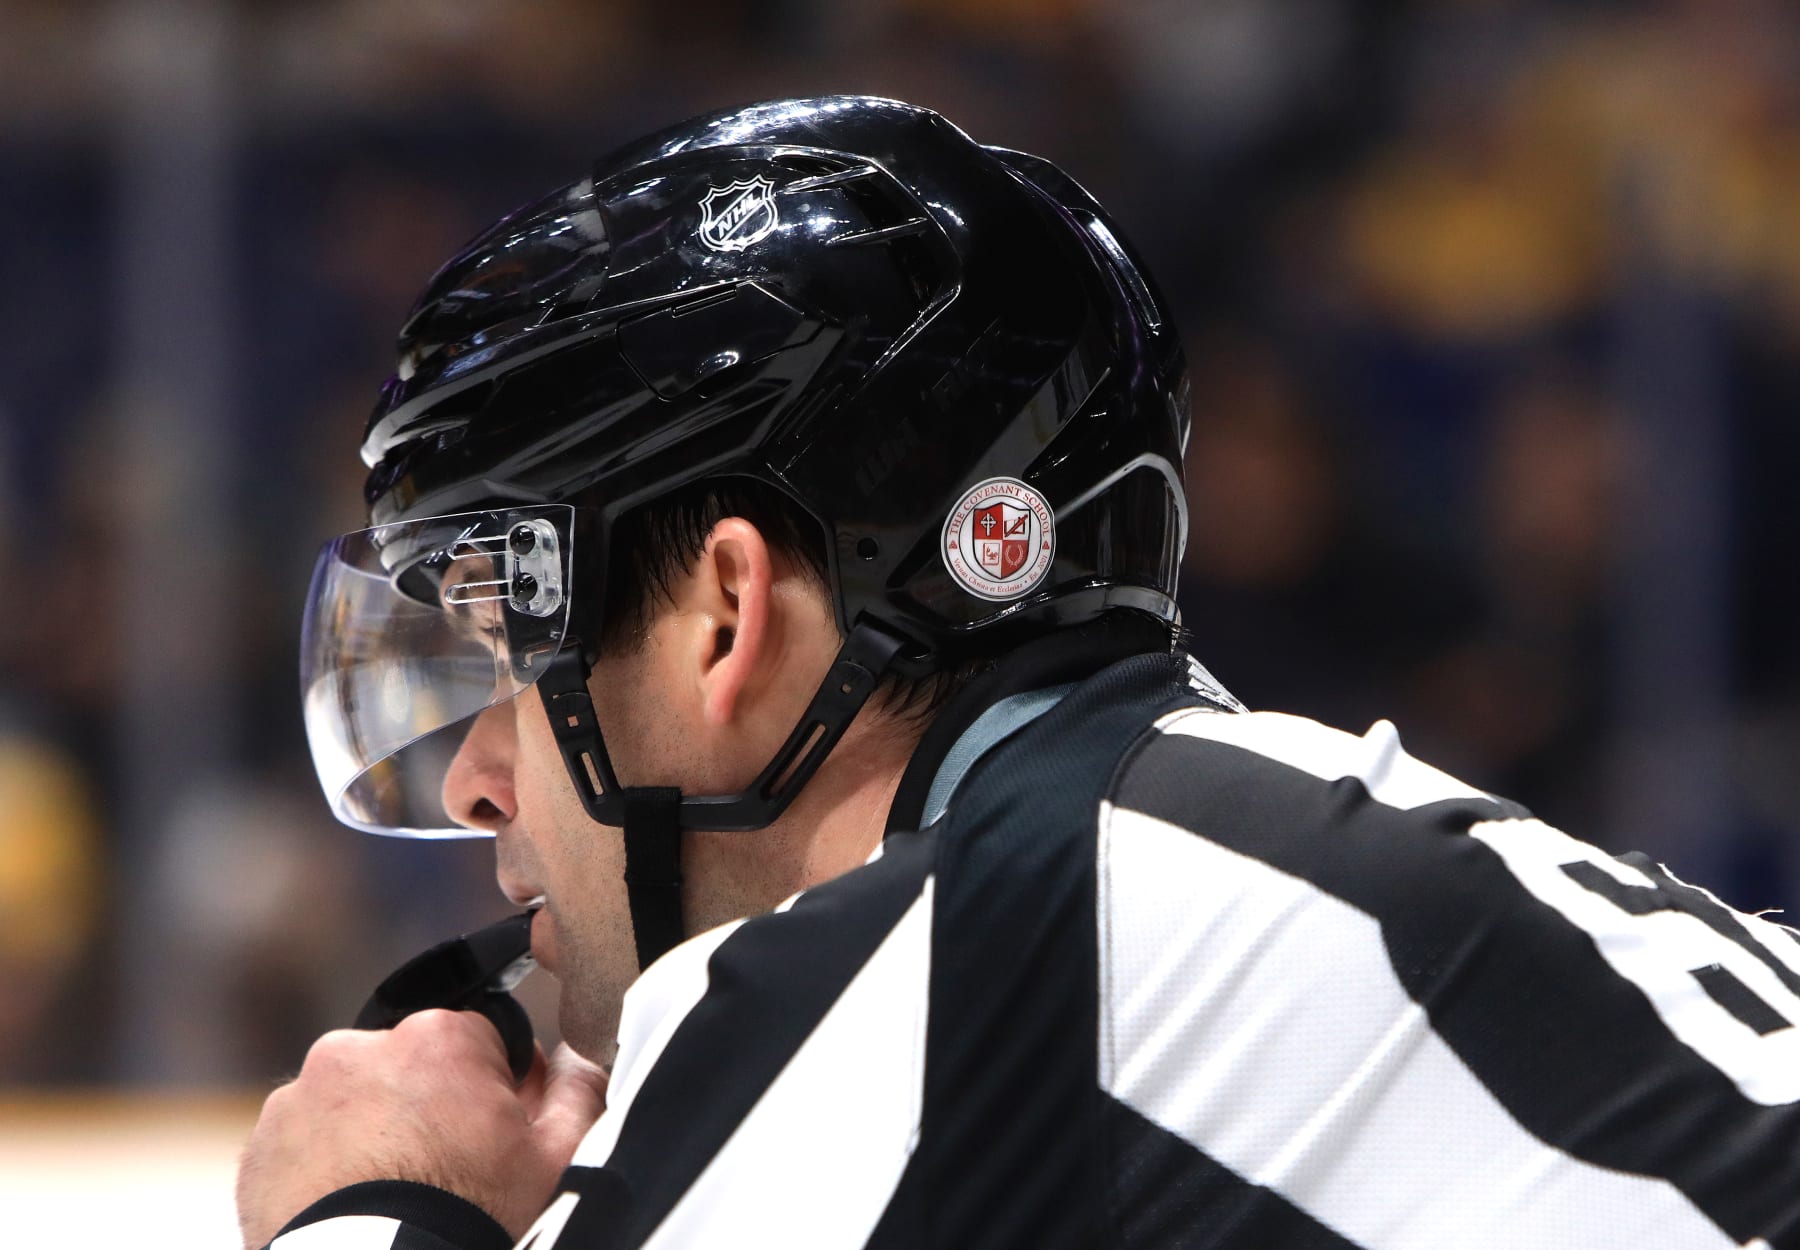 NHL refs need to do better when it comes to calling major